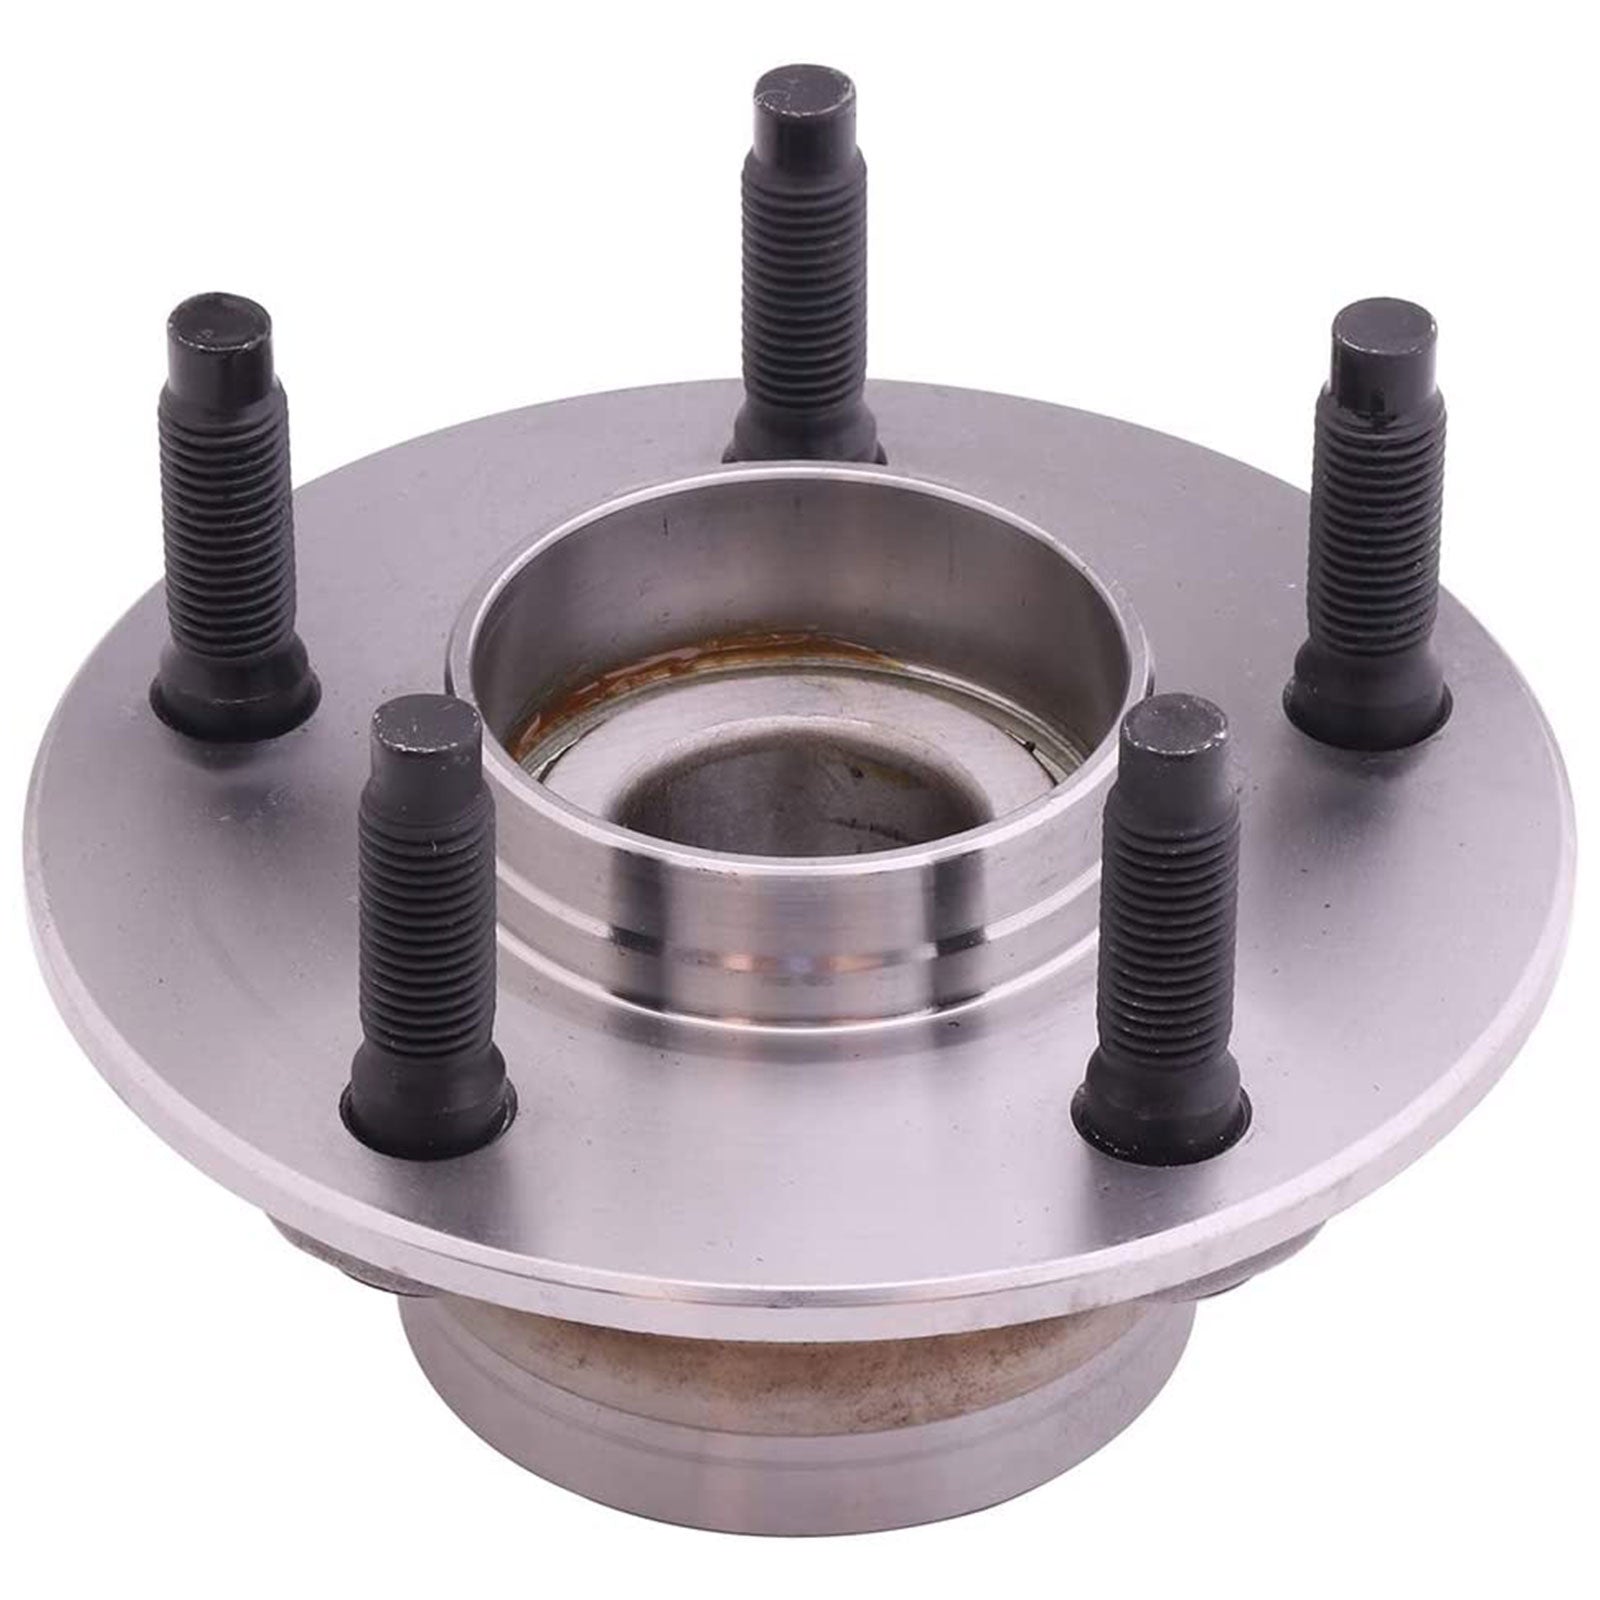 MotorbyMotor (2WD Rear Wheel Bearing and Hub Assembly Fits for 1990-2007 Ford Taurus, 1990-2004 Mercury Sable Wheel Hub w/5 Lugs [FWD, Non-ABS]-512164 MotorbyMotor